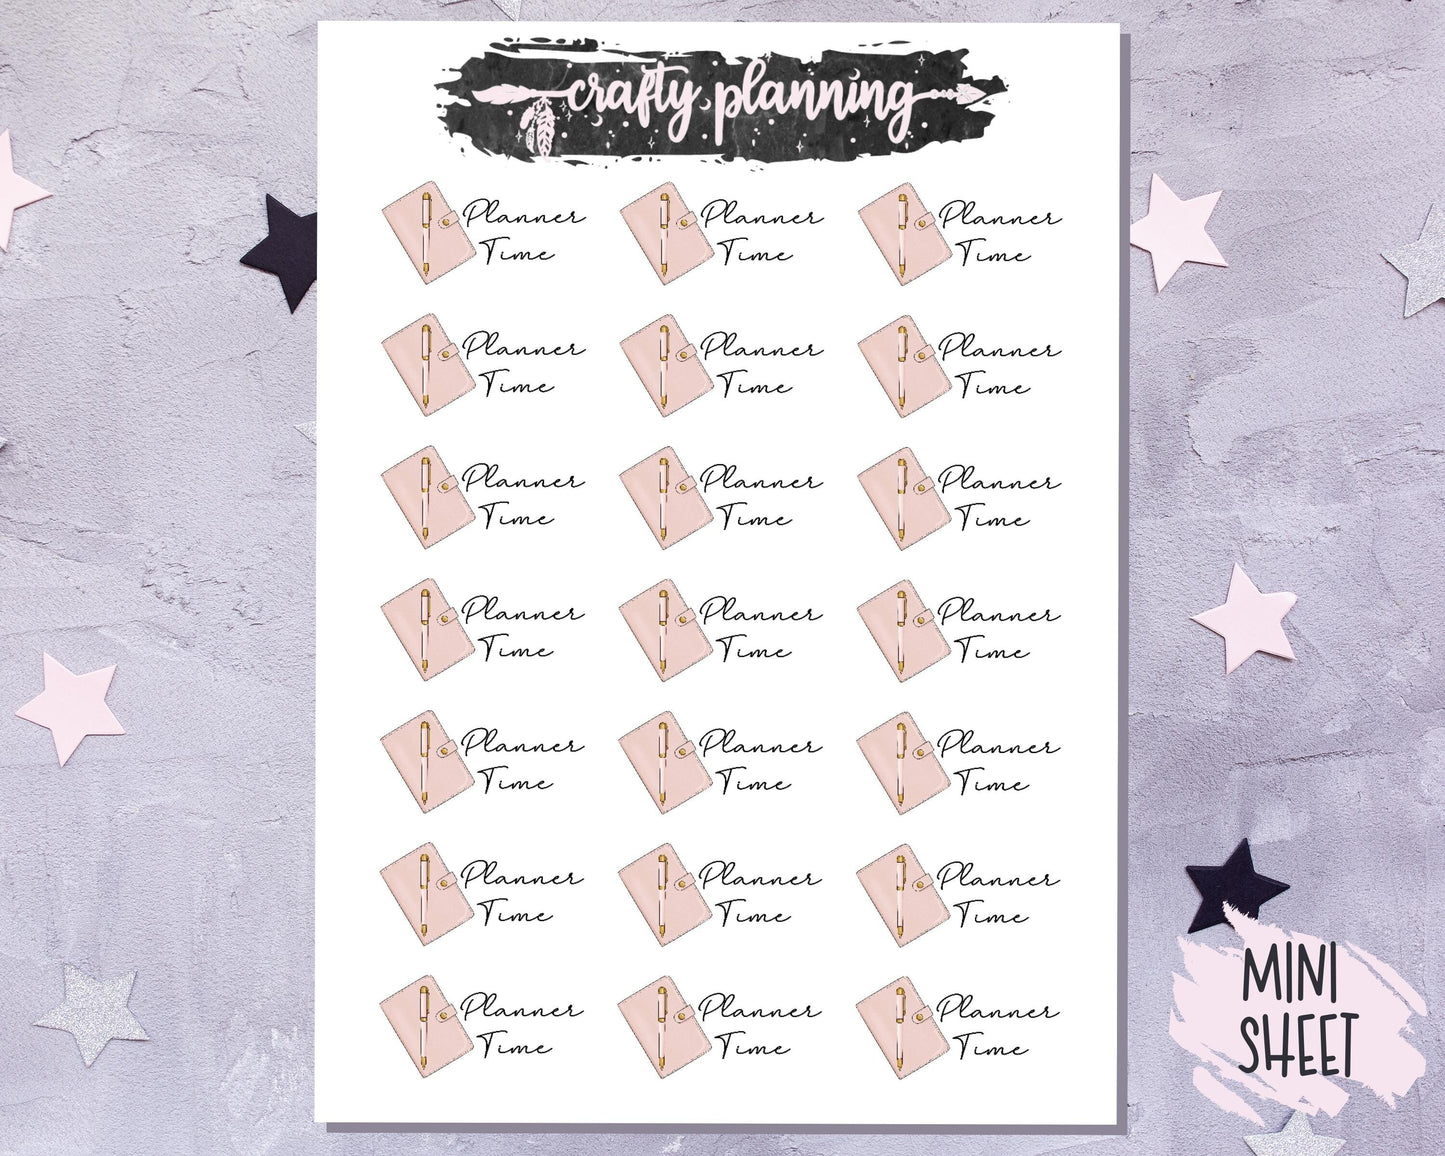 Planner Time Stickers, Planner Stickers, Stationery Stickers, Functional Stickers, Blush Stickers